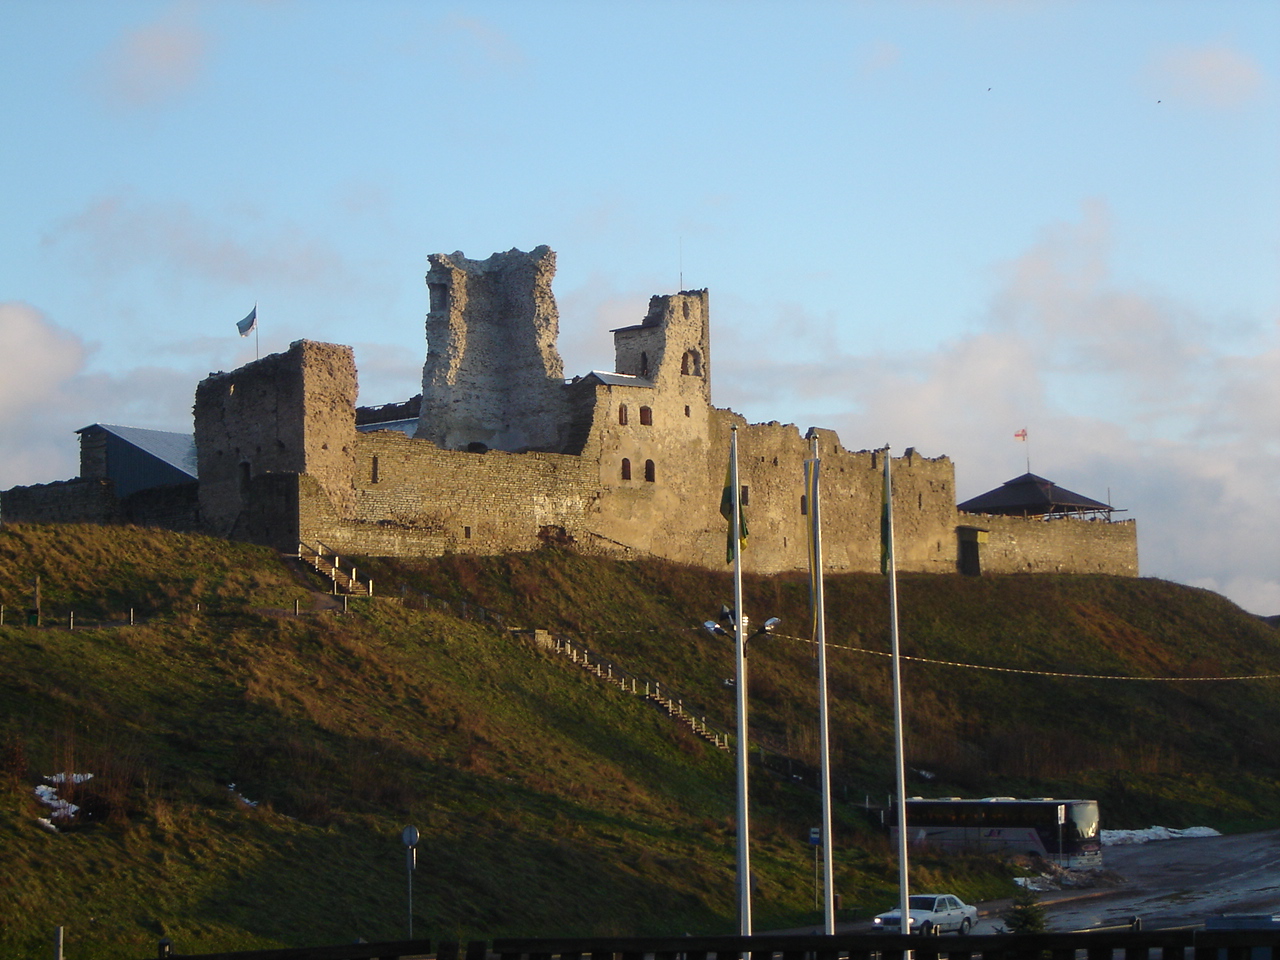 Rakvere Order 2 - the western wall of the city with towers.